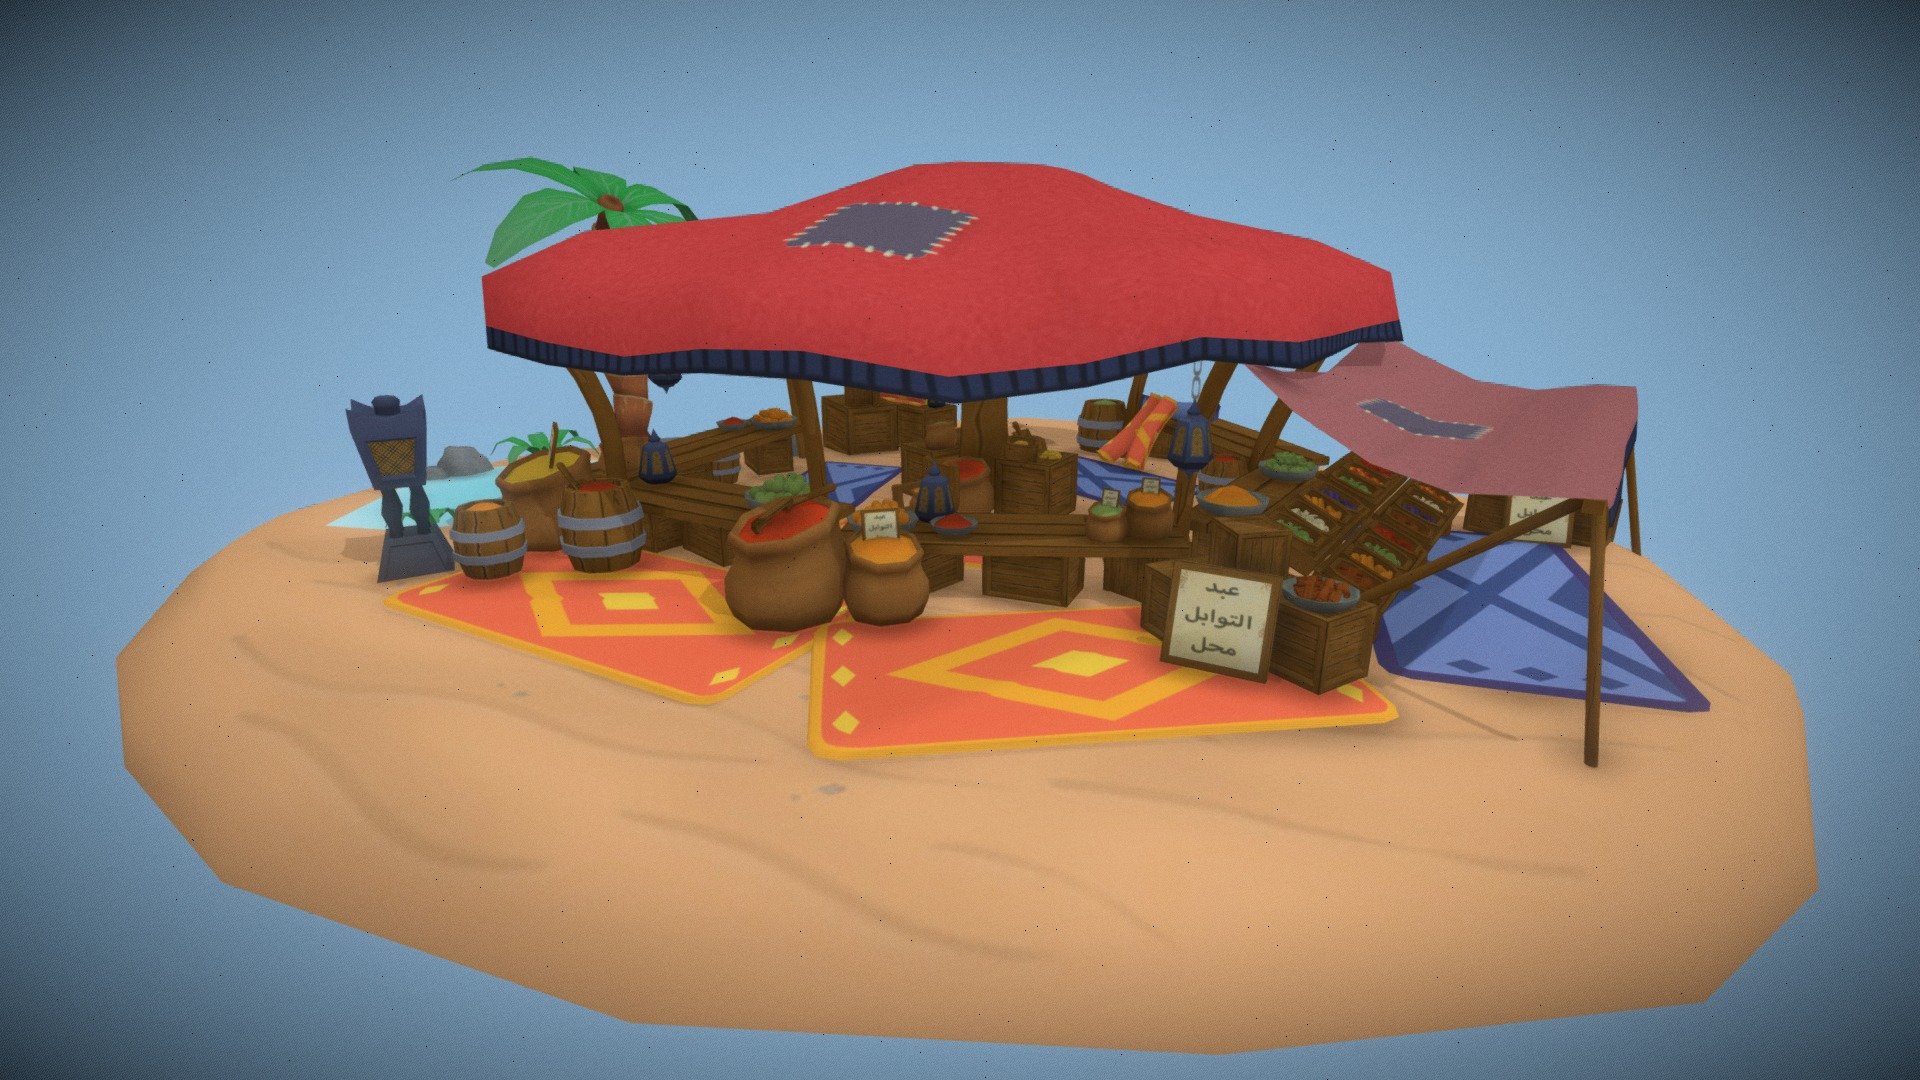 A 1001 nights inspired Arabian spice and fruit shop made for Game Art 2023 - Abdul's Spice Shop - 3D model by Elias (Edzra) Van Dyck (@EdzraDecker) 3d model